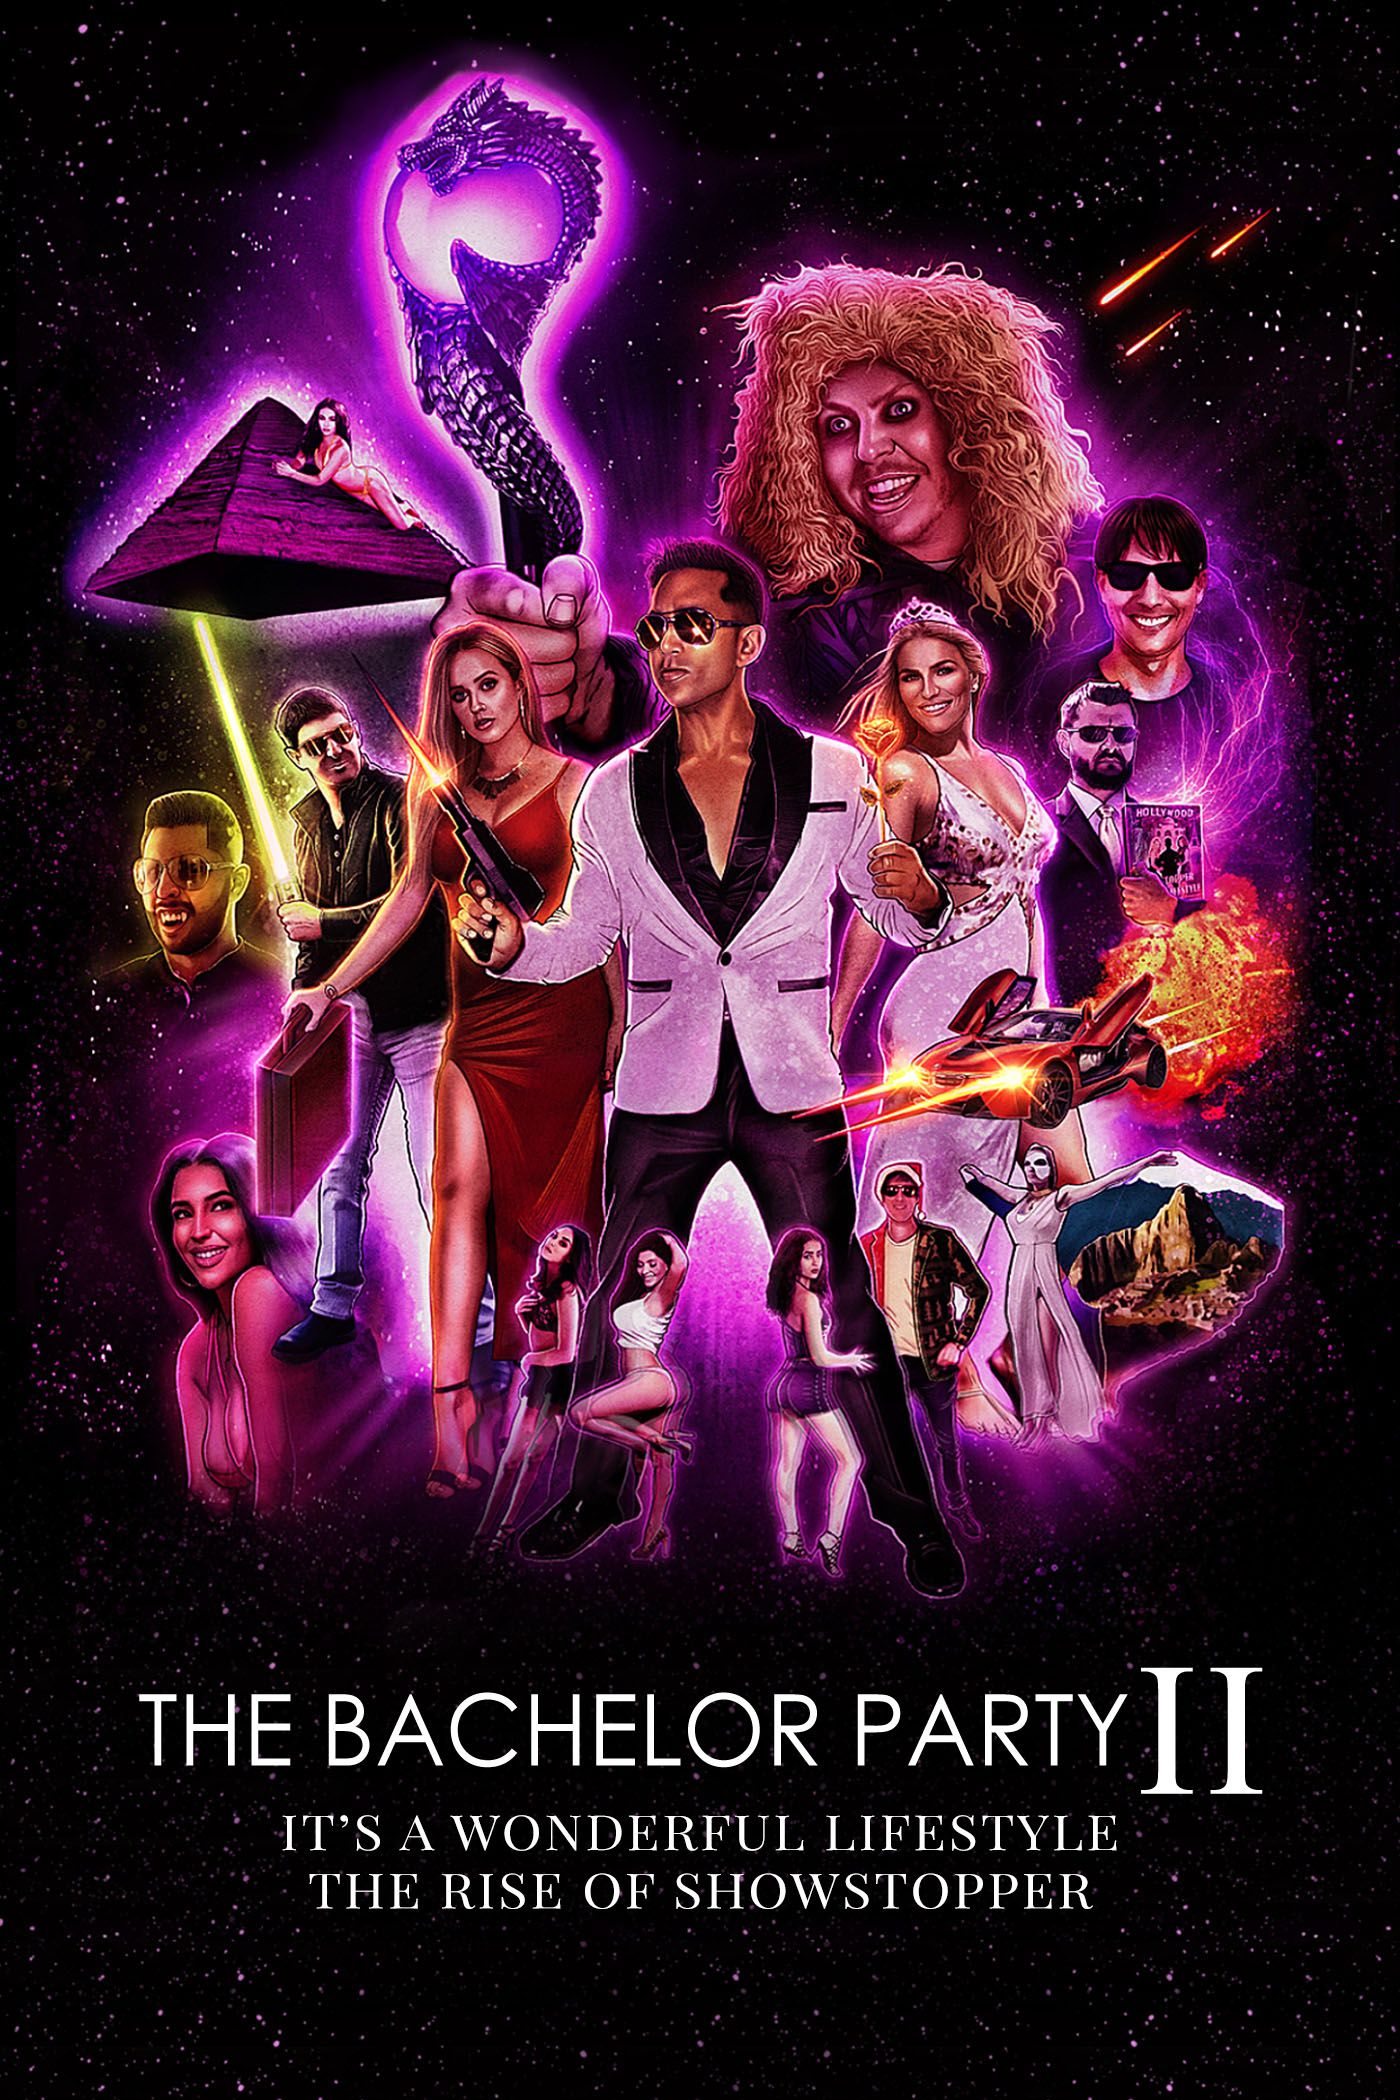 The Bachelor Party 2: It’s a Wonderful Lifestyle – The Rise of Showstopper